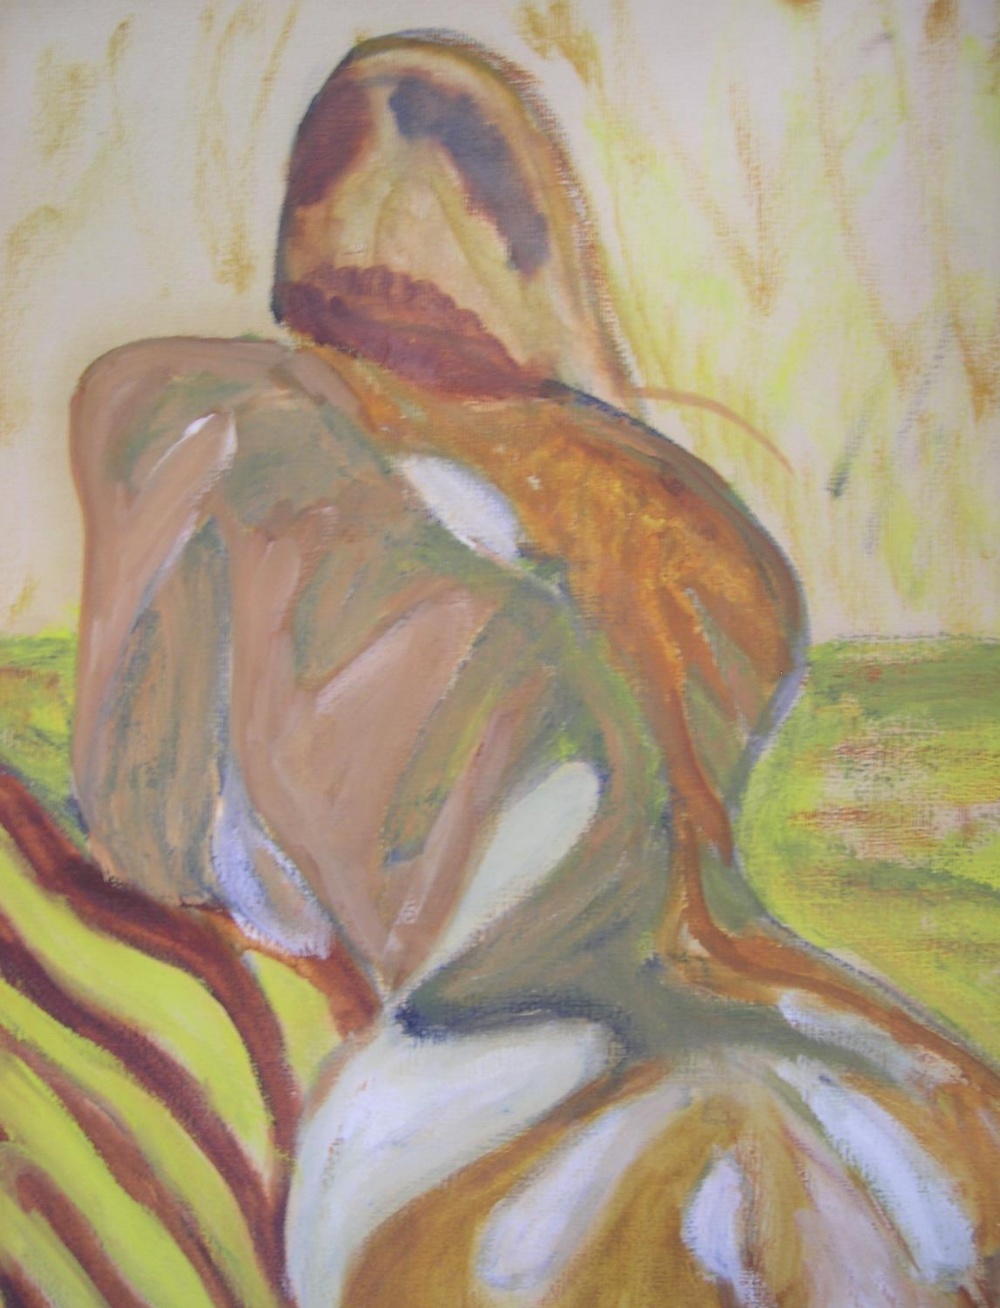 Eddie Bianchi (Newcastle-Upon-Tyne active 1975-1995) "Back of reclining female nude", oils on paper, - Image 3 of 3